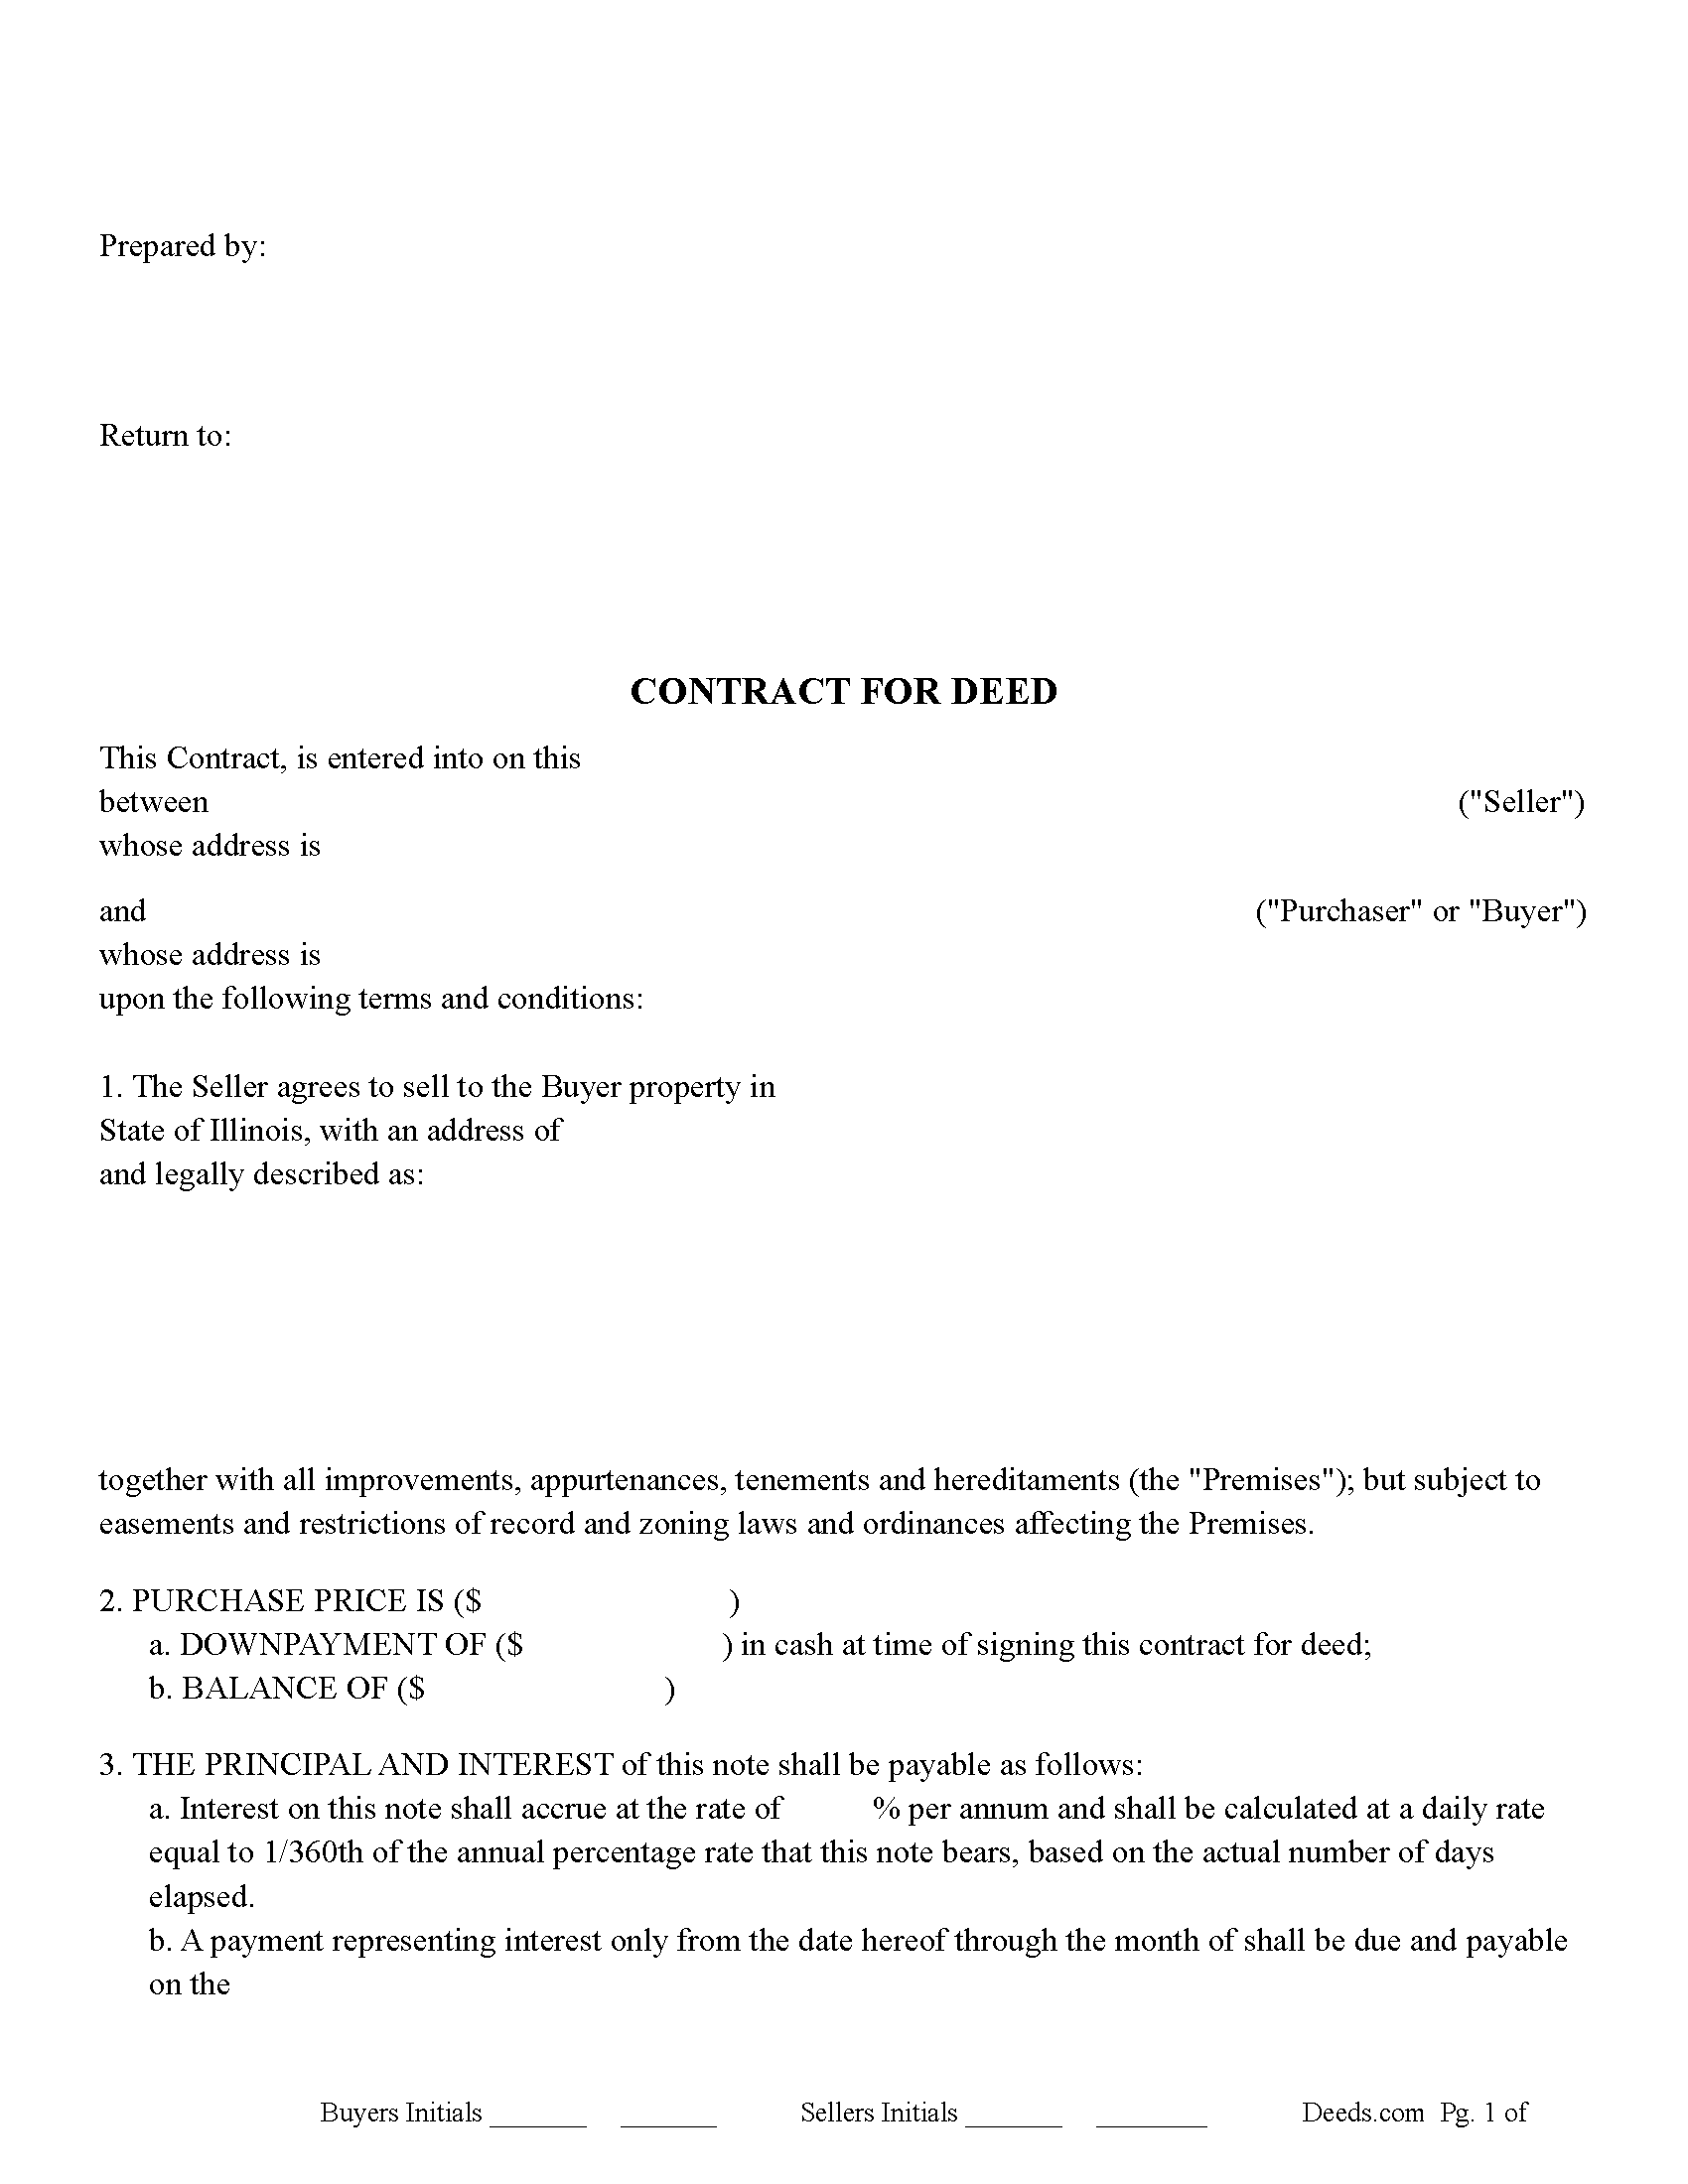 Clark County Contract for Deed Form